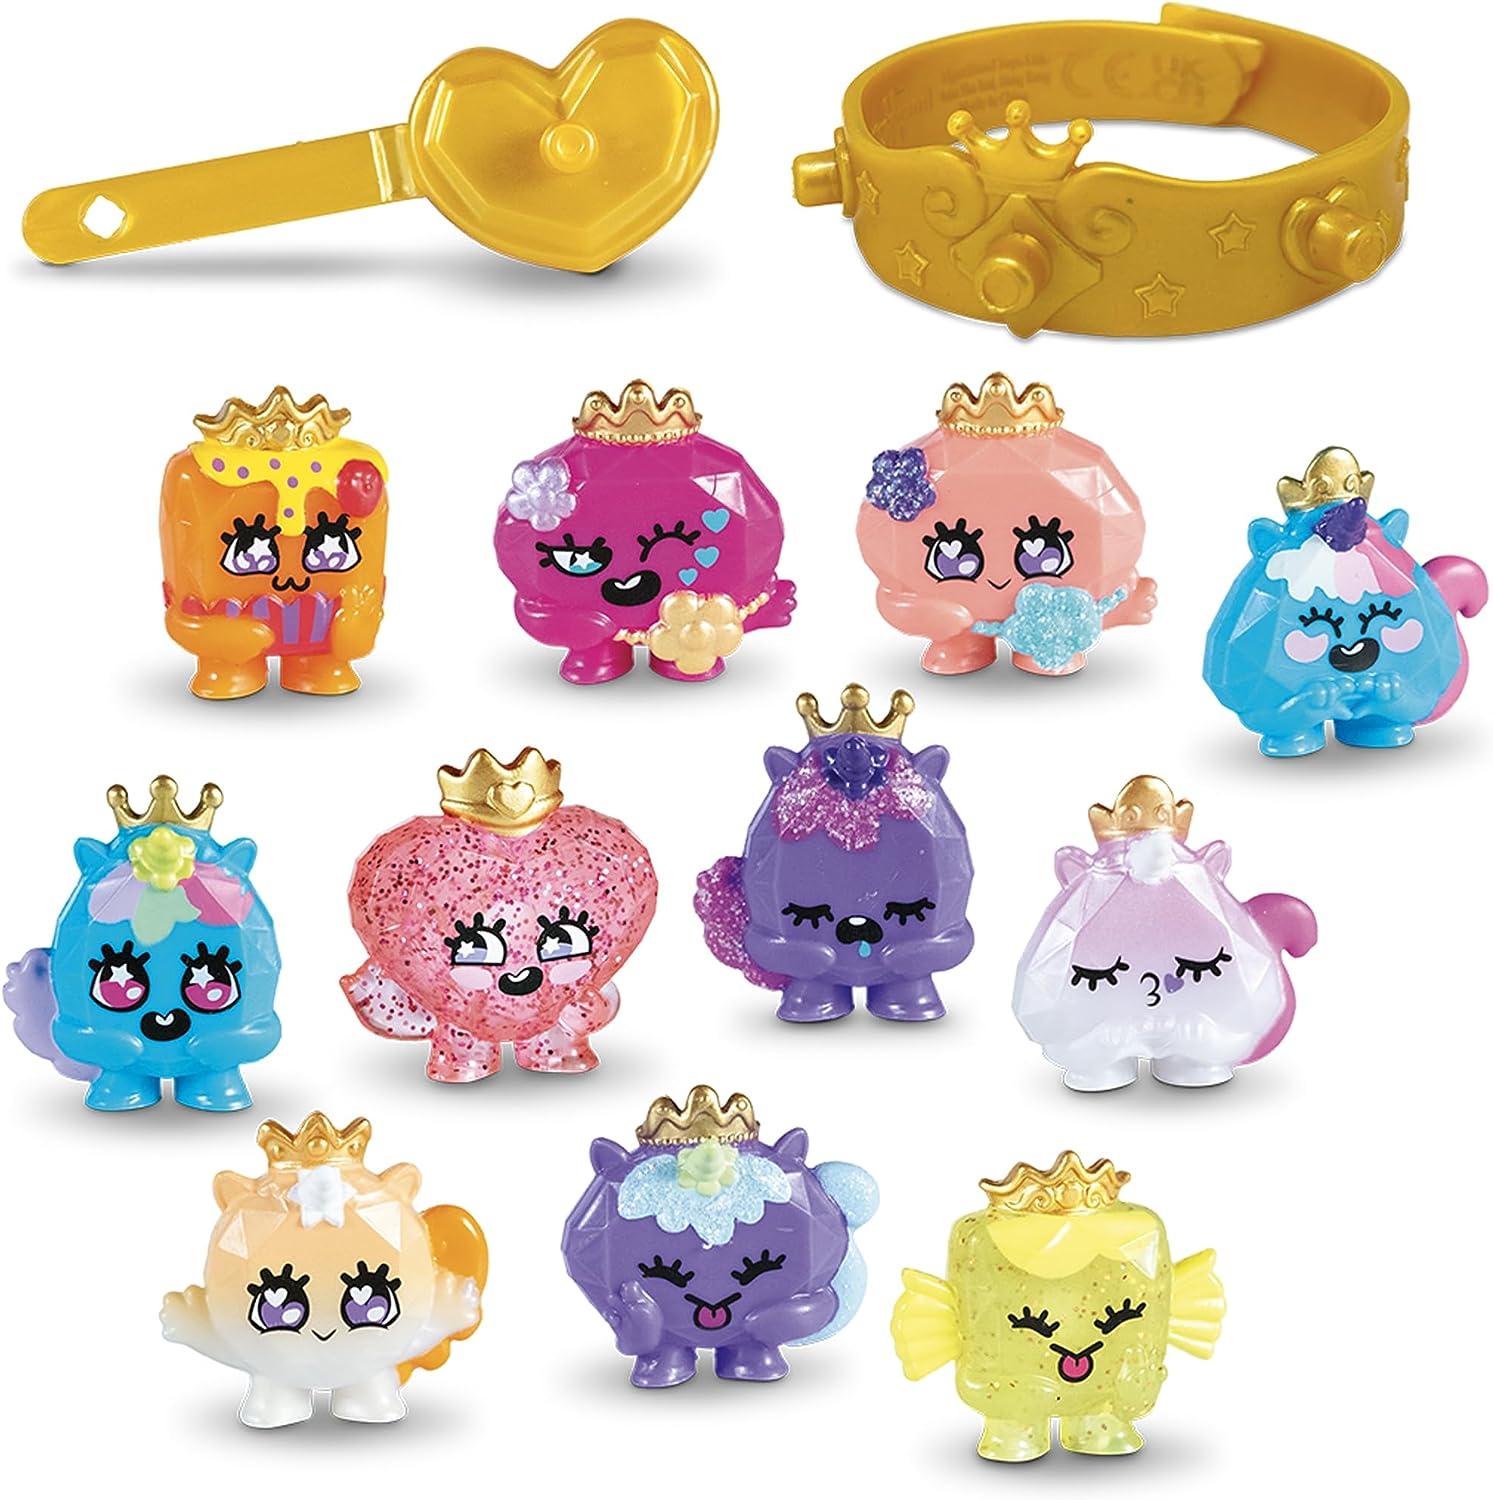 BANDAI Royals 12 Pack Pinky Promise Collectable Gemmy Friends